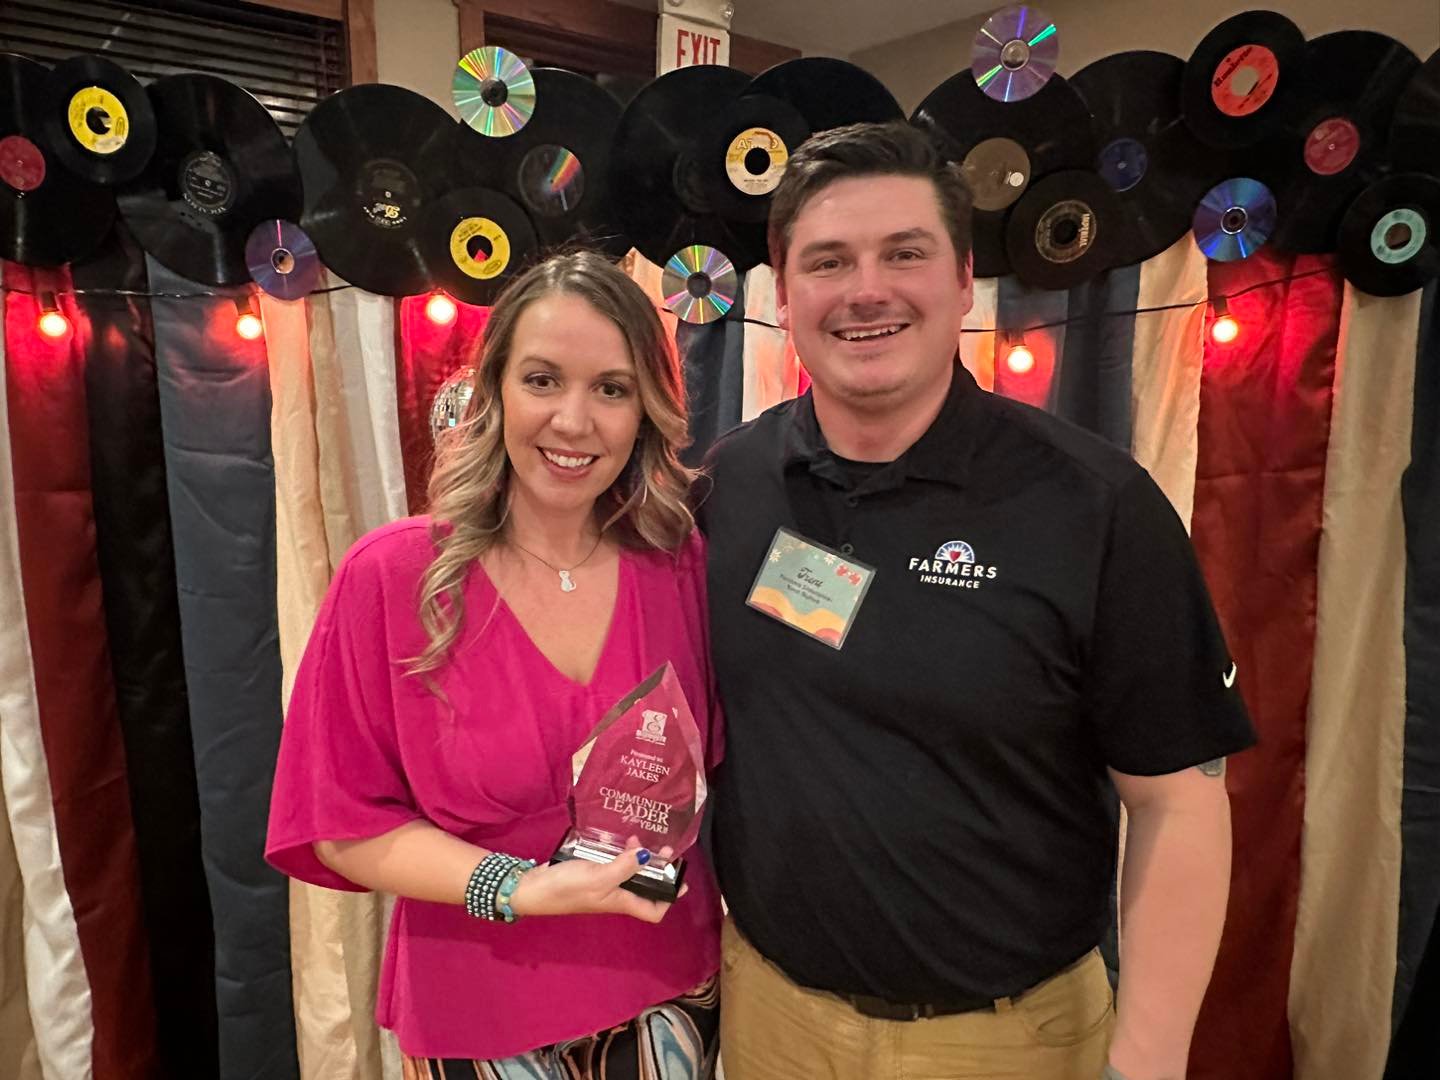 Kayleen Jakes, owner of East End Gifts and Brush Strokes Paint Party, received the Community Leader Award from Ellsworth Chamber Vice President Trent Nyhus at the eighth annual awards banquet at Kilkarney Hills Feb. 20.